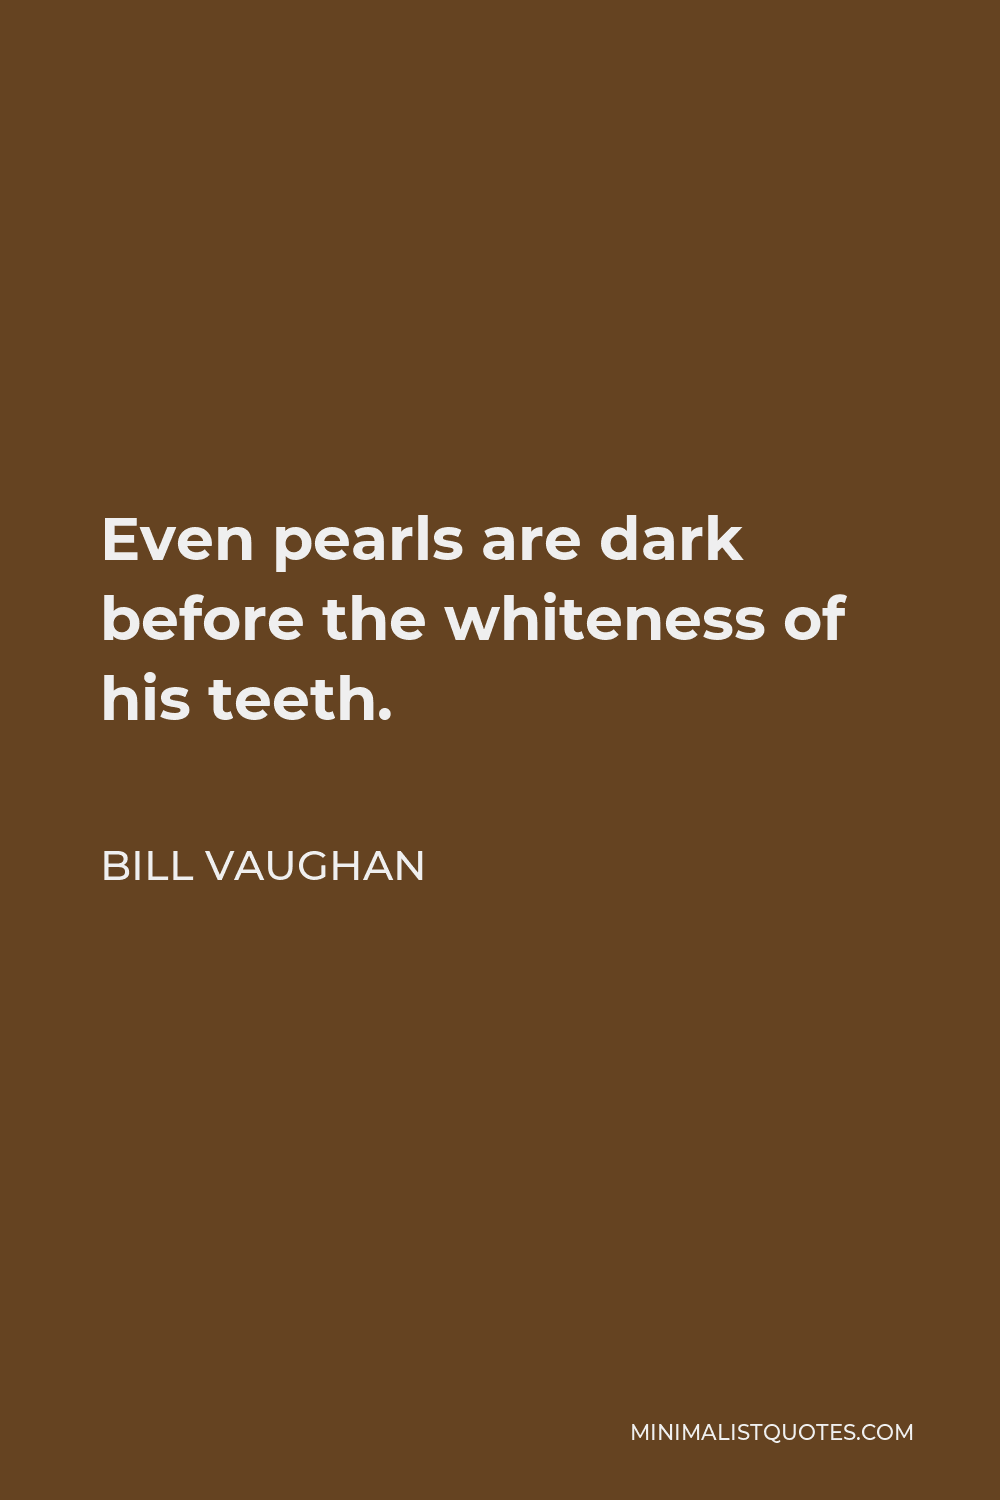 Bill Vaughan Quote - Even pearls are dark before the whiteness of his teeth.